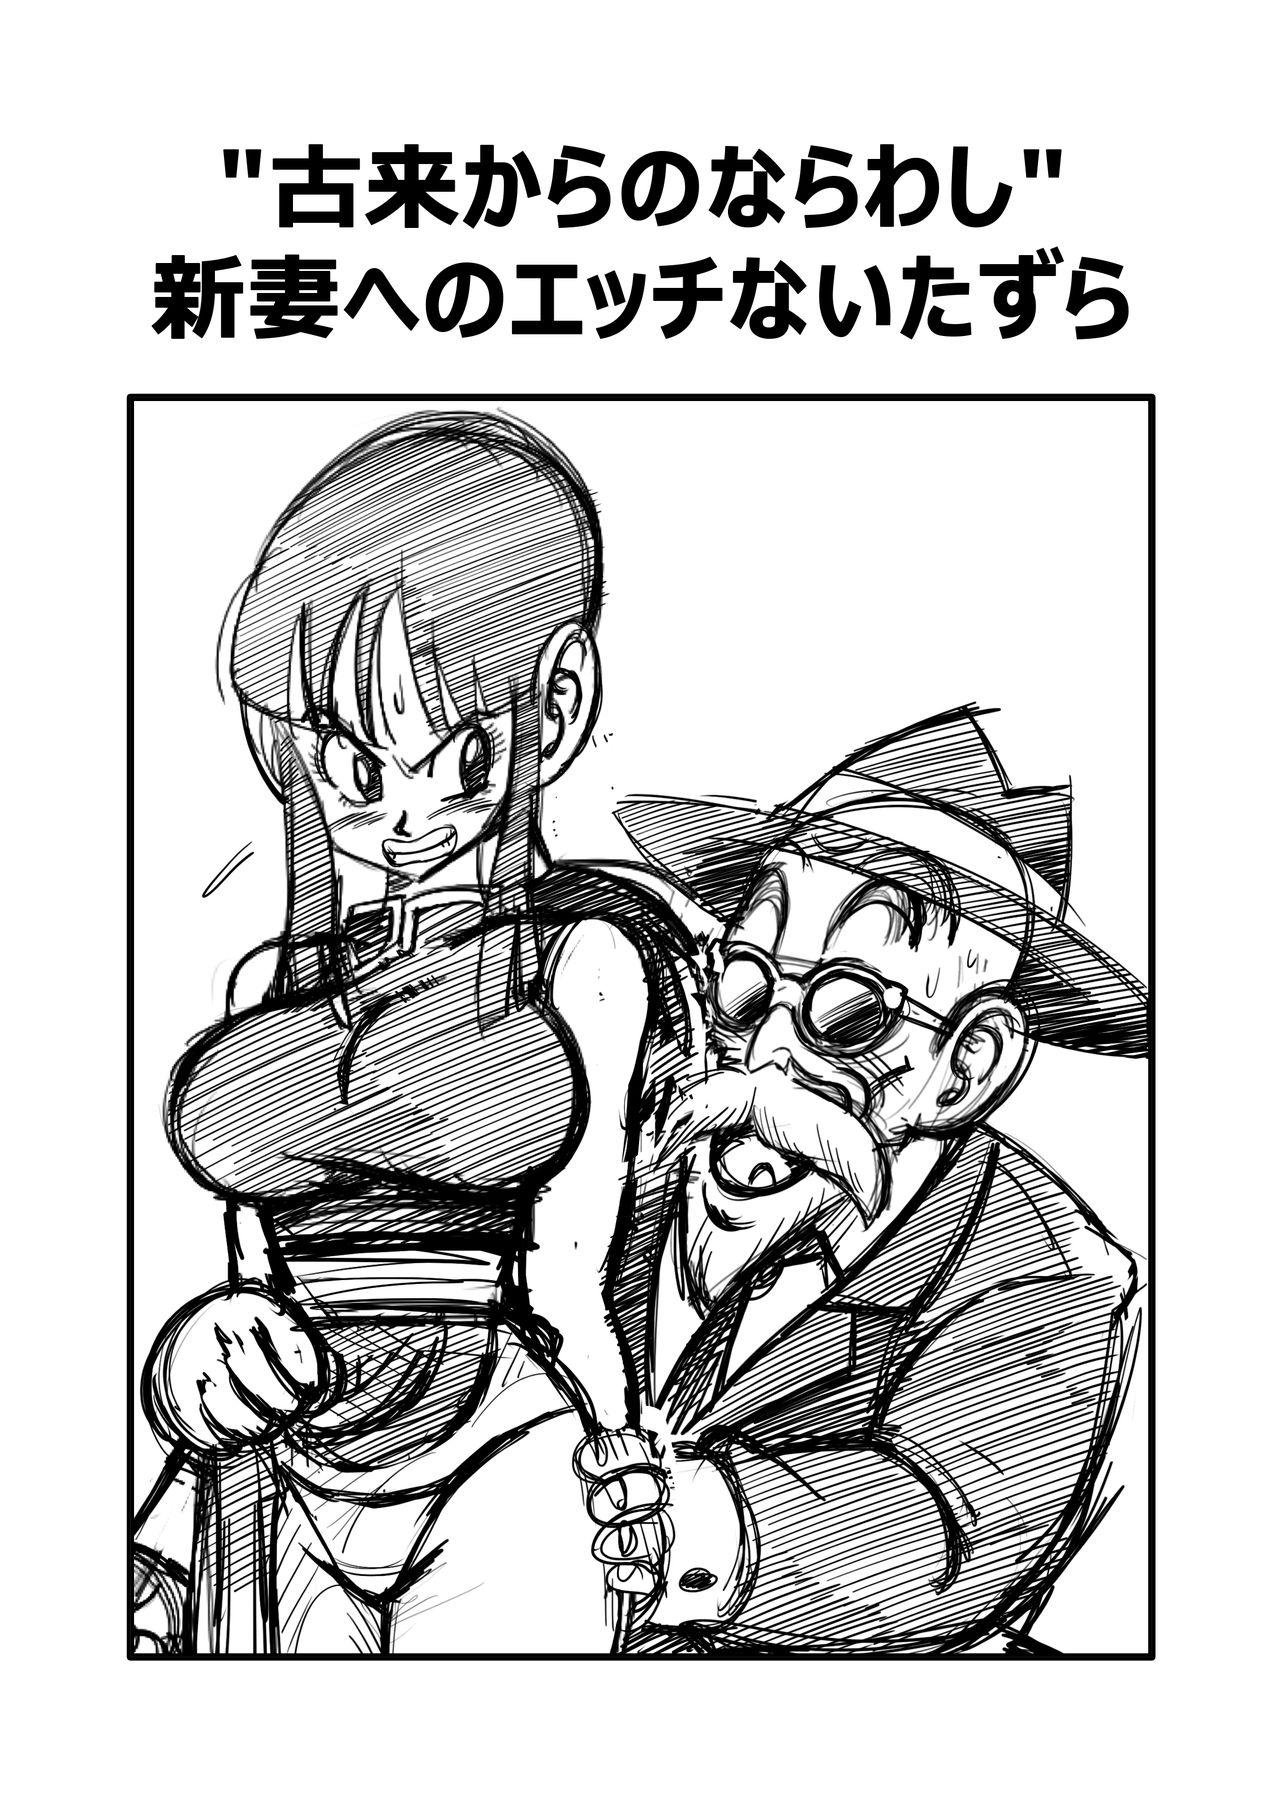 Hispanic "An Ancient Tradition" - Young Wife is Harassed! - Dragon ball z Pau Grande - Page 3